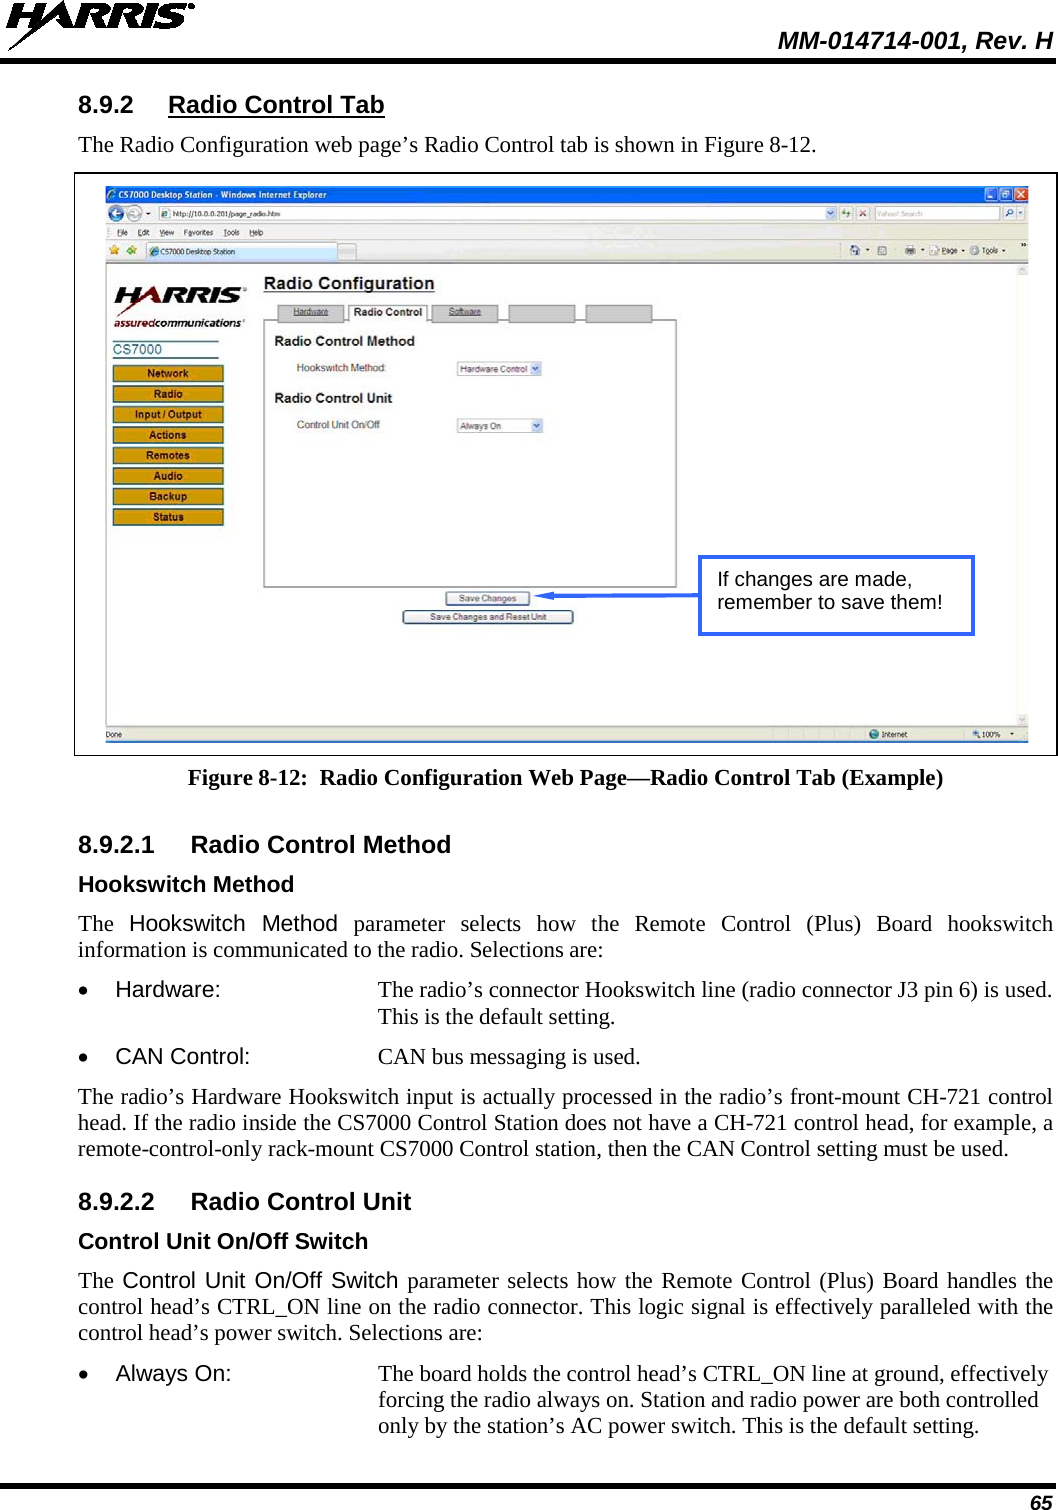  MM-014714-001, Rev. H 65 8.9.2  Radio Control Tab The Radio Configuration web page’s Radio Control tab is shown in Figure 8-12.   Figure 8-12:  Radio Configuration Web Page—Radio Control Tab (Example)  8.9.2.1  Radio Control Method Hookswitch Method The  Hookswitch Method parameter  selects  how  the  Remote Control (Plus) Board hookswitch information is communicated to the radio. Selections are: • Hardware:  The radio’s connector Hookswitch line (radio connector J3 pin 6) is used. This is the default setting. • CAN Control:  CAN bus messaging is used. The radio’s Hardware Hookswitch input is actually processed in the radio’s front-mount CH-721 control head. If the radio inside the CS7000 Control Station does not have a CH-721 control head, for example, a remote-control-only rack-mount CS7000 Control station, then the CAN Control setting must be used. 8.9.2.2  Radio Control Unit Control Unit On/Off Switch The Control Unit On/Off Switch parameter selects how the Remote Control (Plus) Board handles the control head’s CTRL_ON line on the radio connector. This logic signal is effectively paralleled with the control head’s power switch. Selections are: • Always On: The board holds the control head’s CTRL_ON line at ground, effectively forcing the radio always on. Station and radio power are both controlled only by the station’s AC power switch. This is the default setting. If changes are made, remember to save them! 